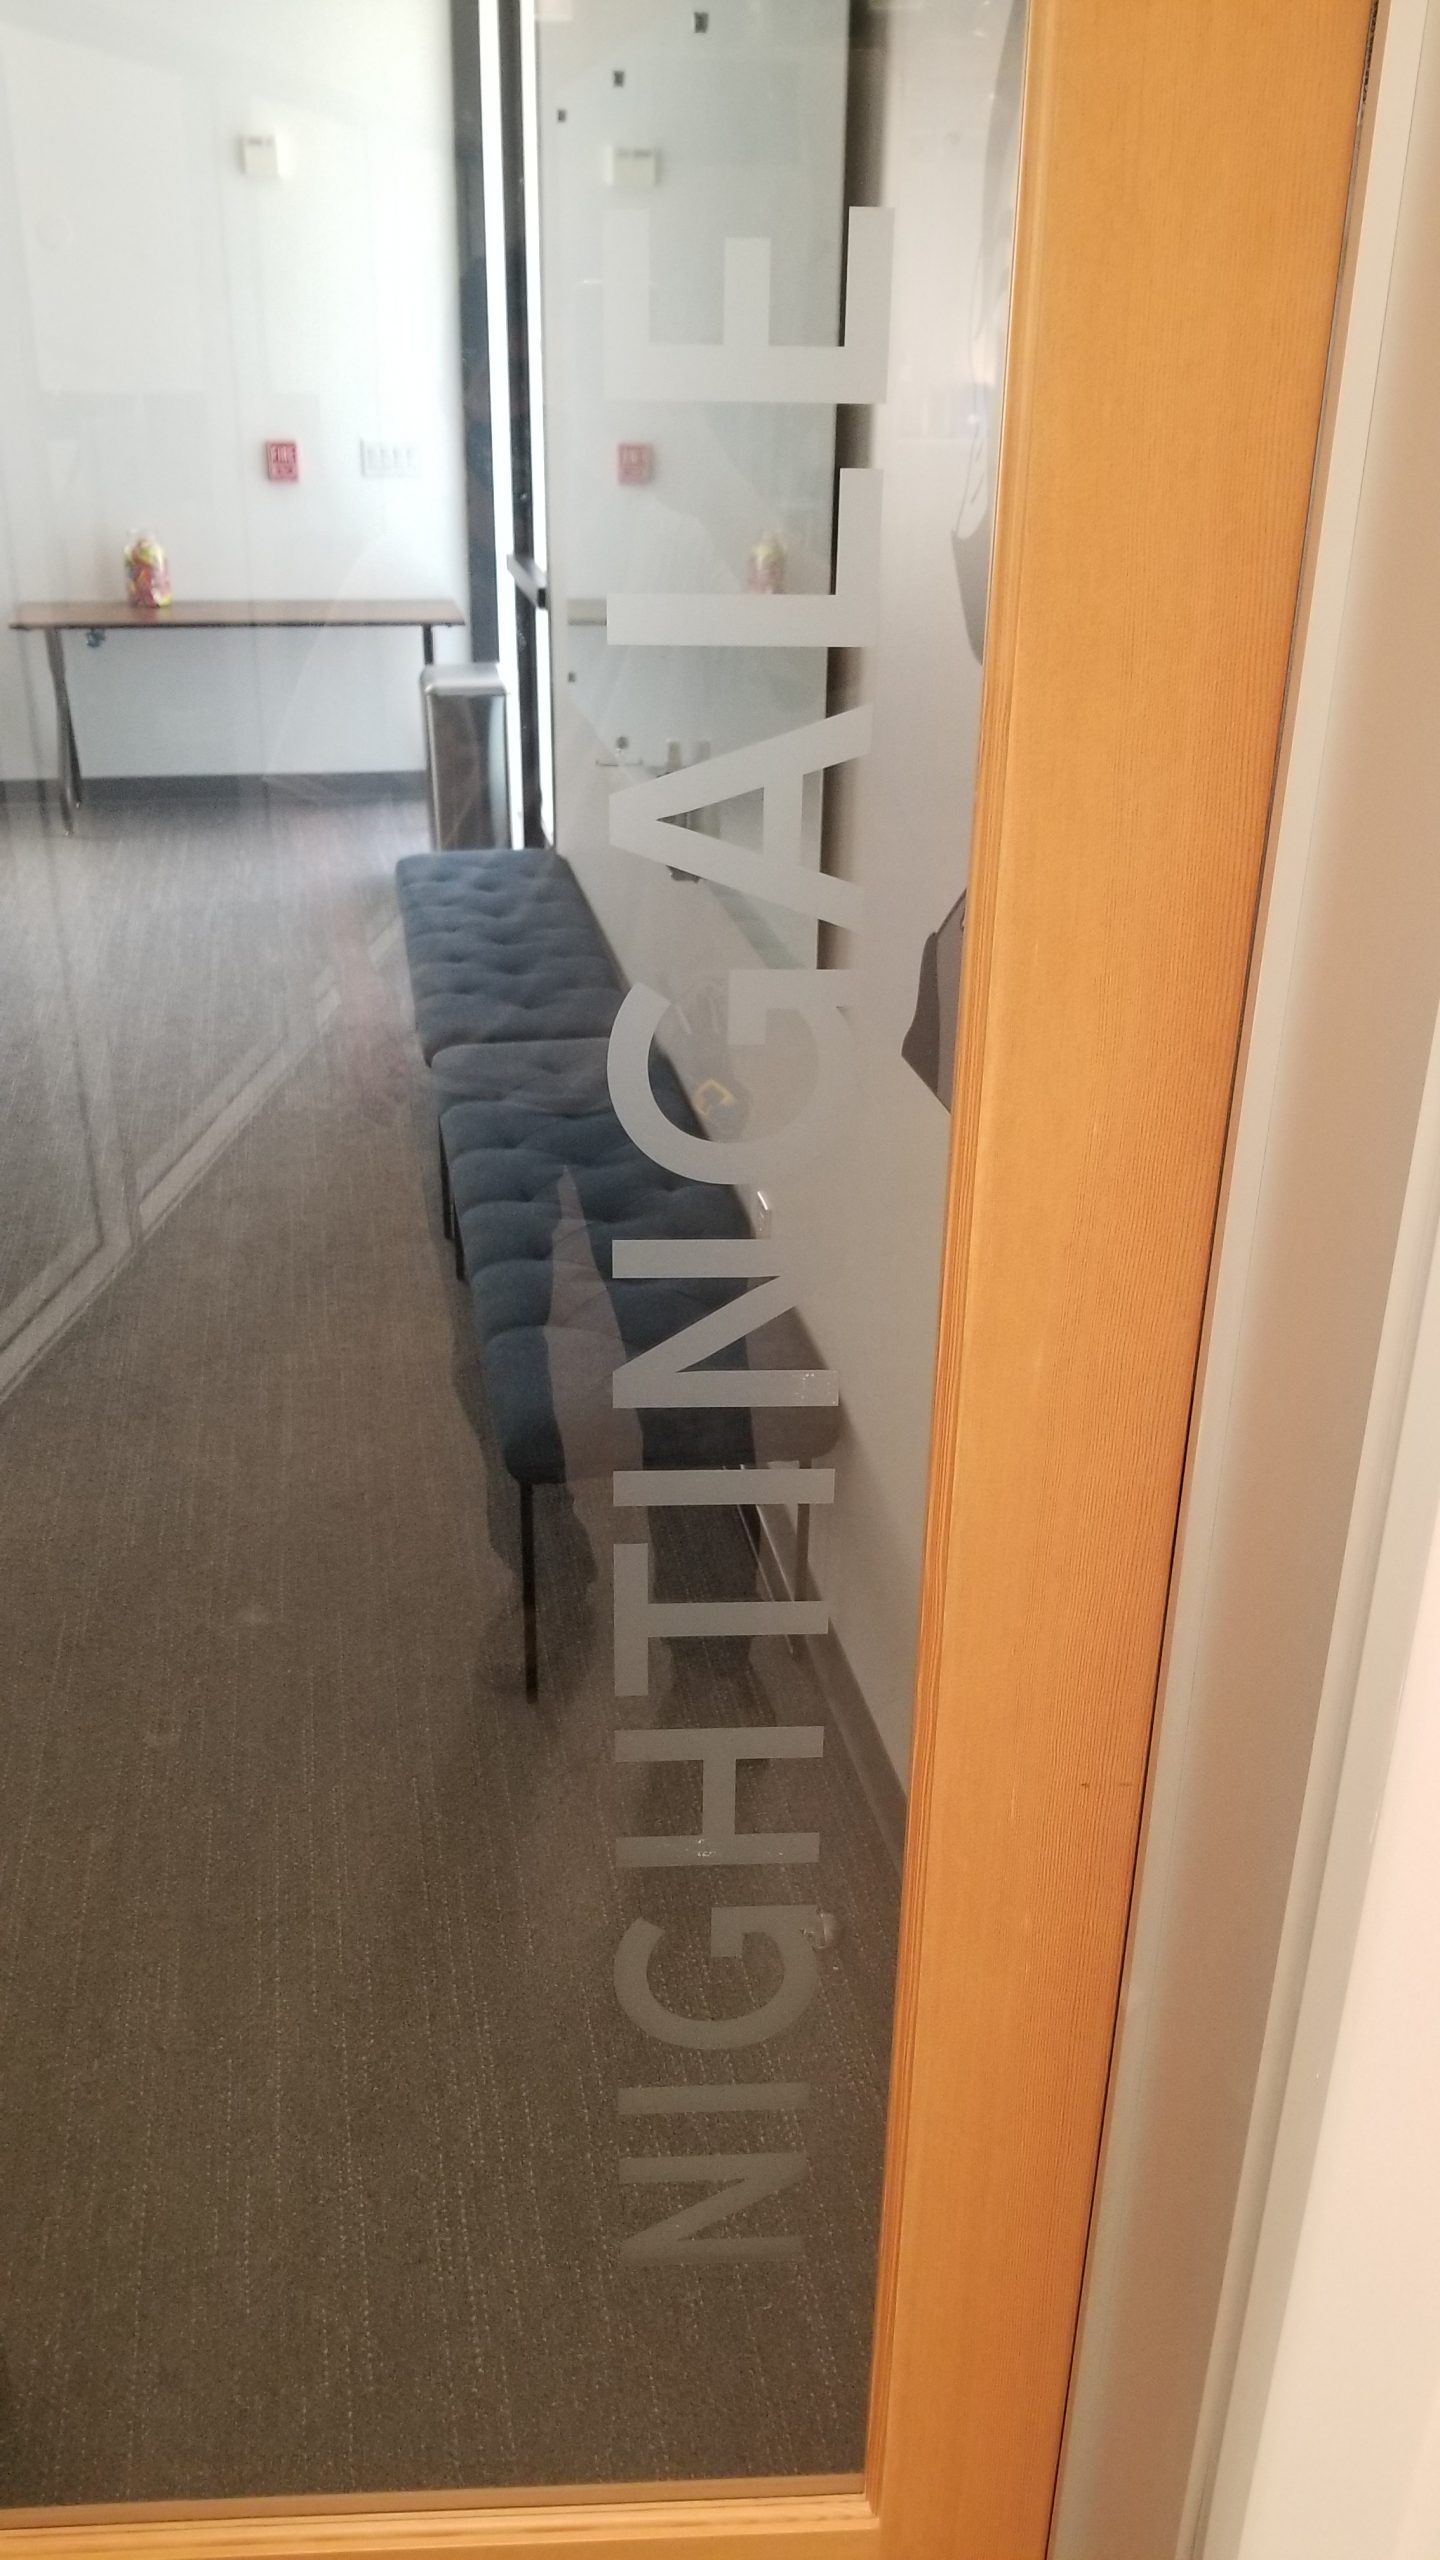 A part of the Office Design Package for Tiger Connect in Santa Monica. The frosted glass vinyl names each conference room after a famous medical pioneers.